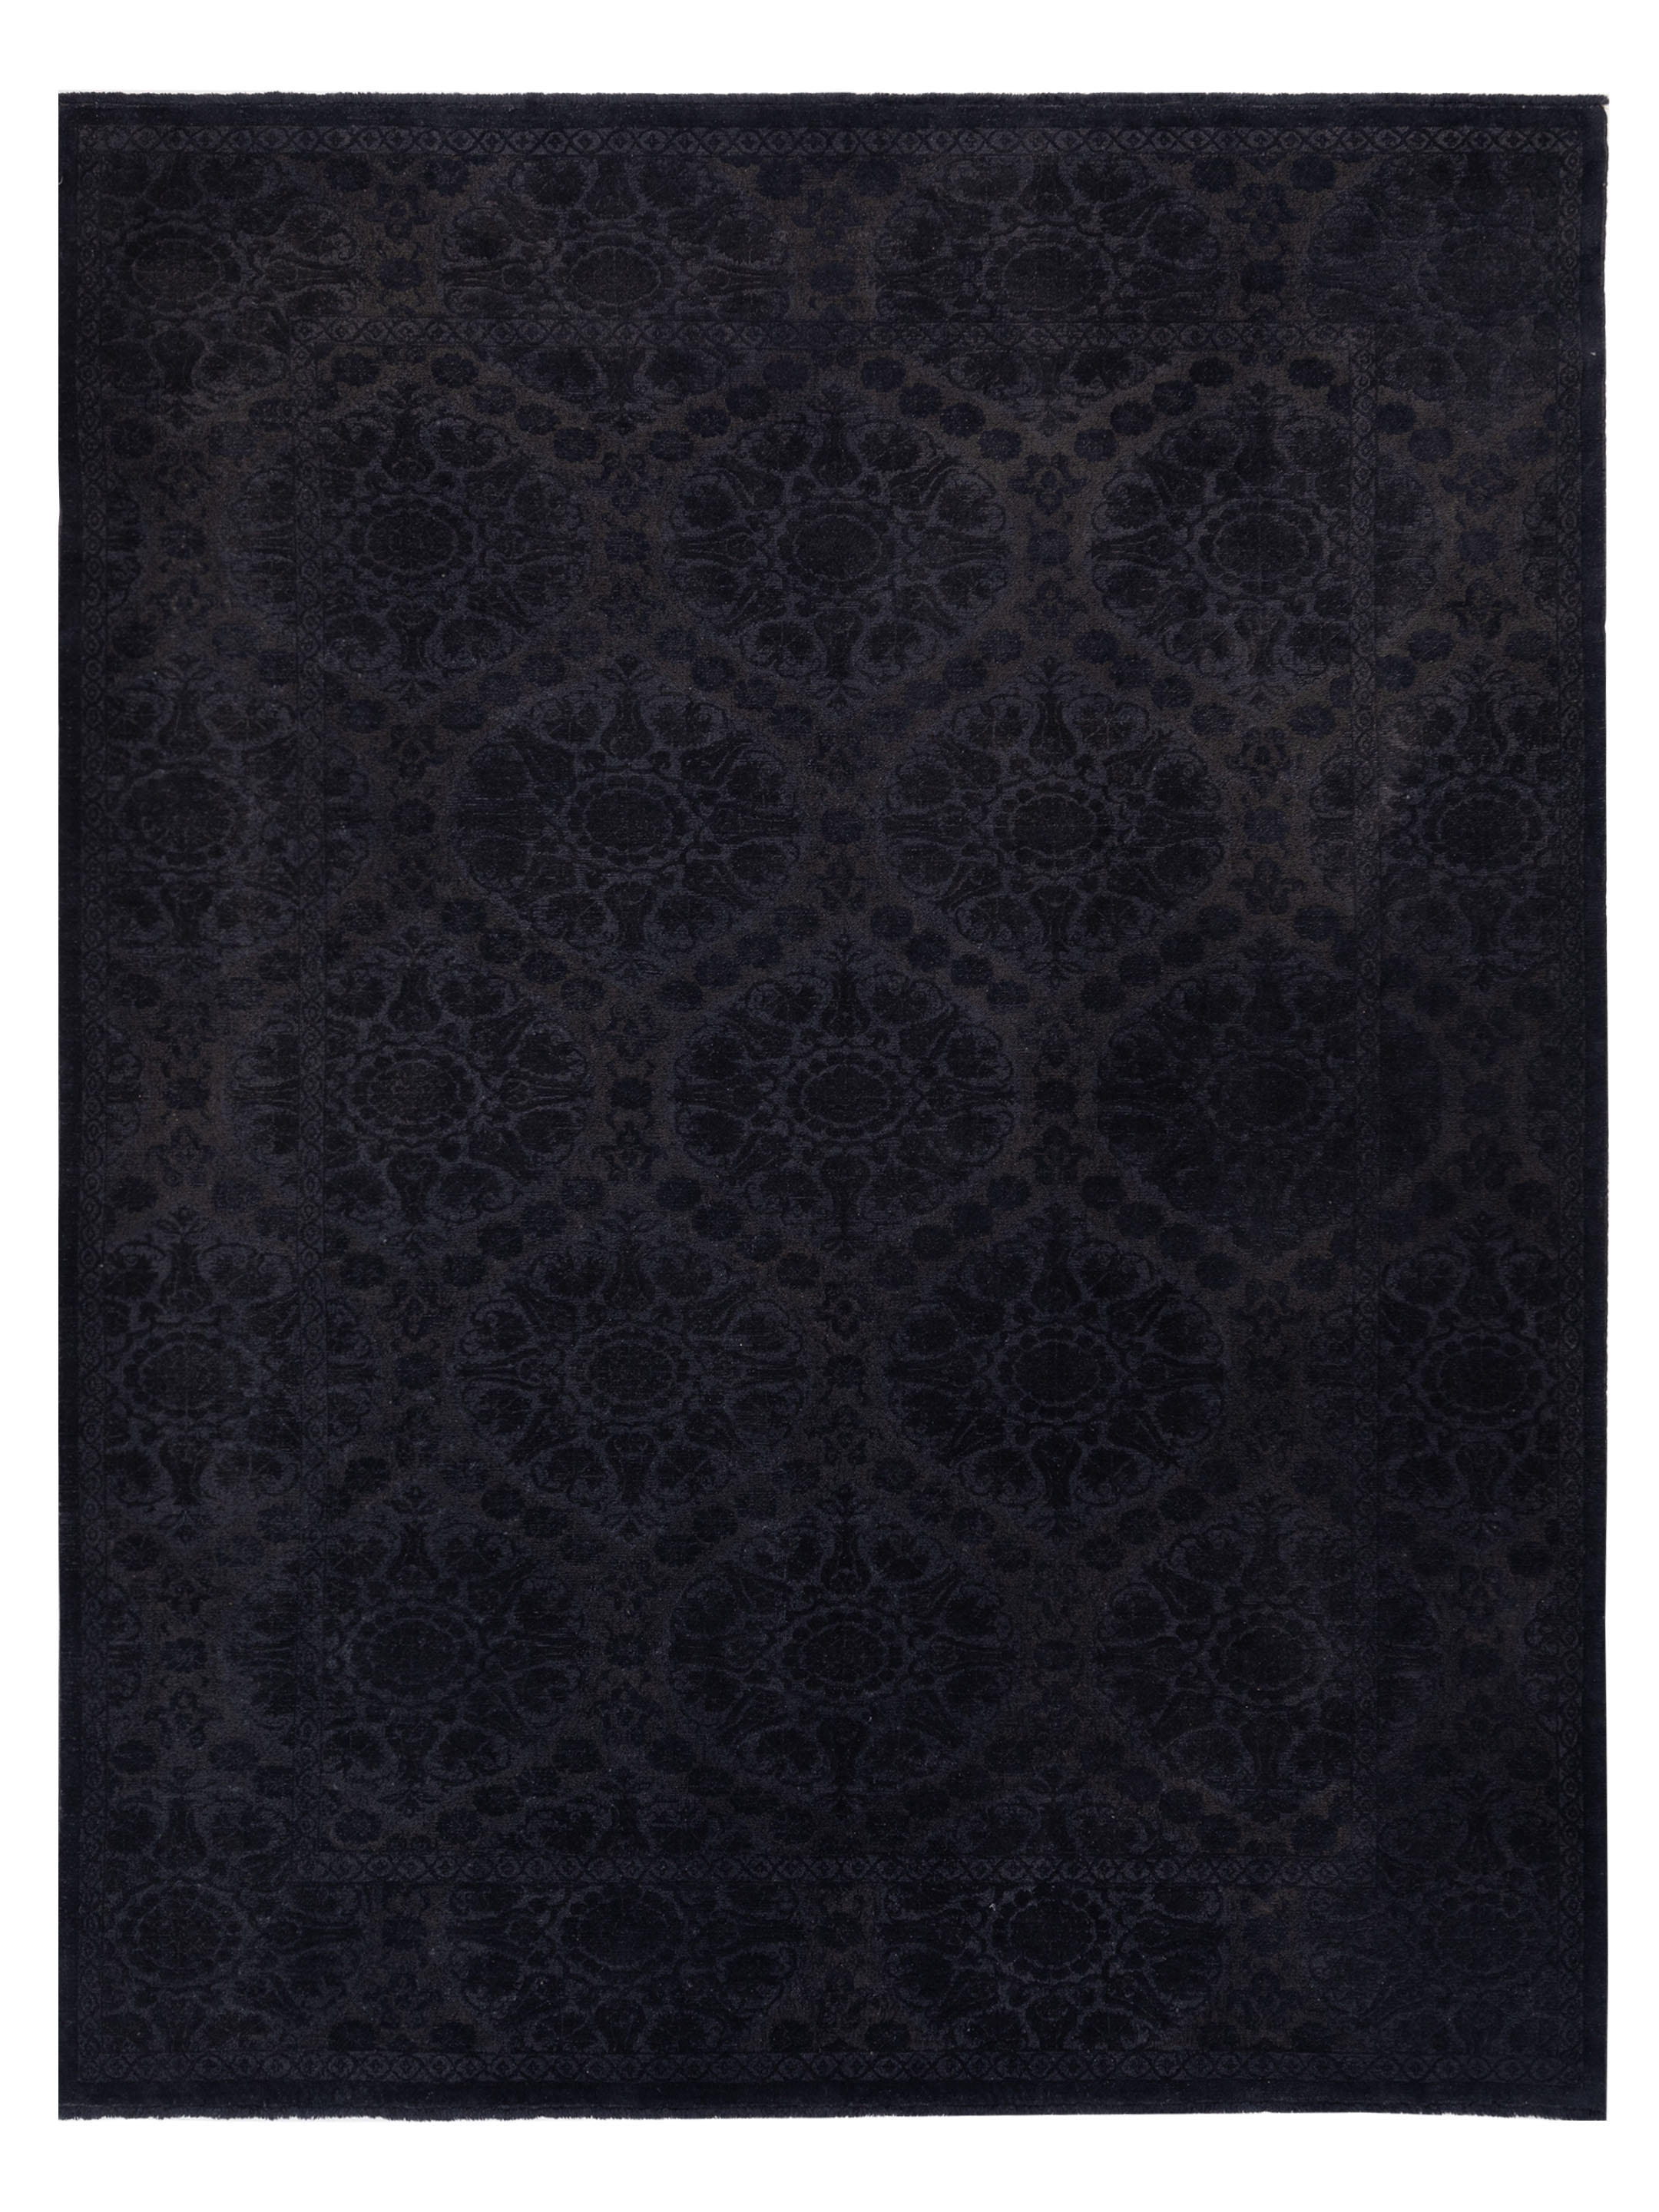 Transitional Black Gothic Area Rug	